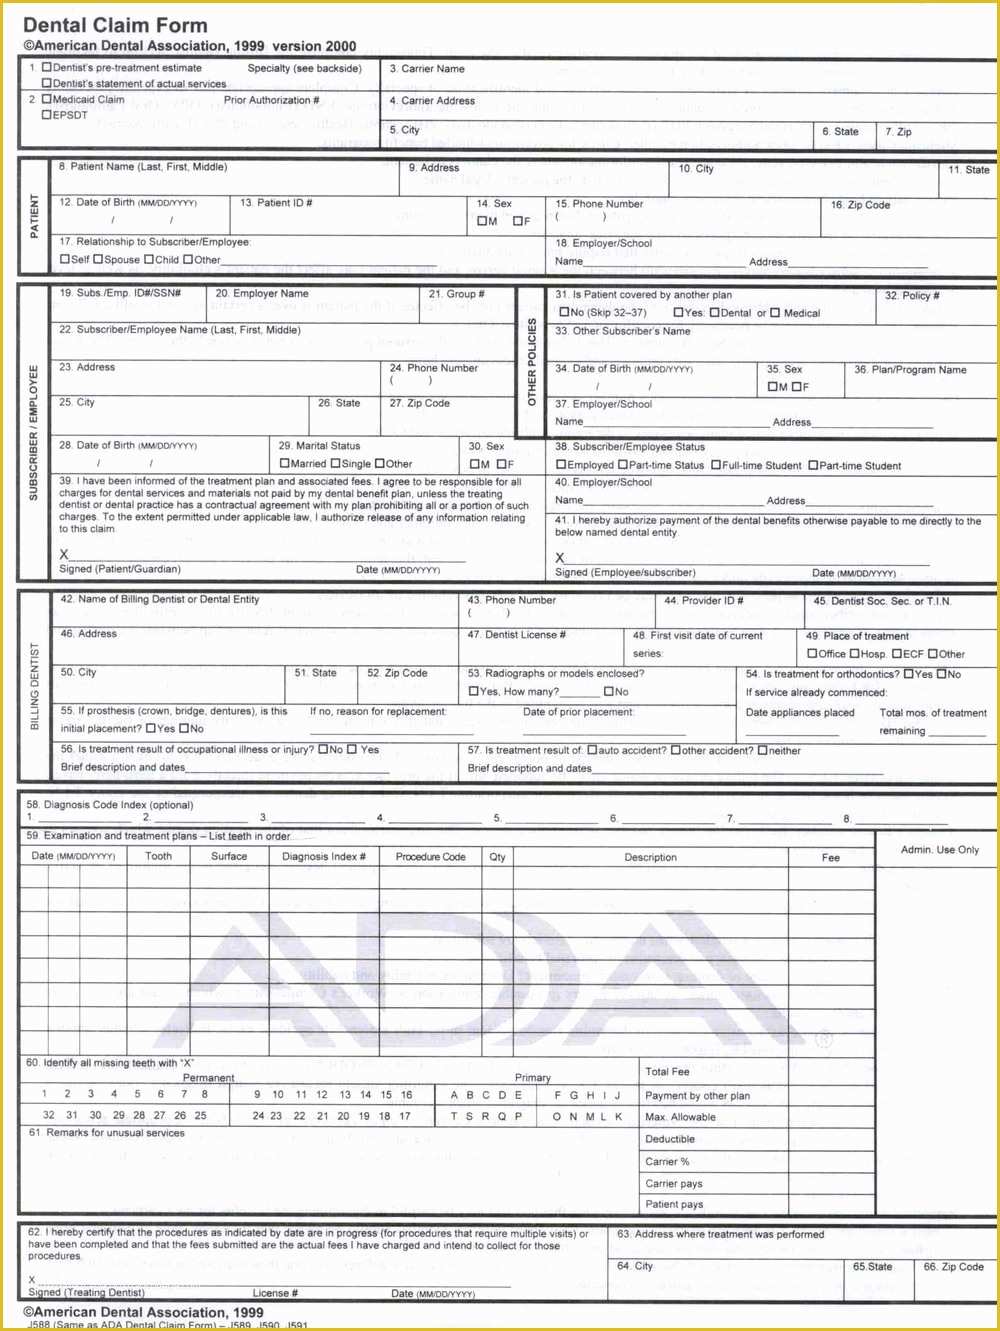 Free Cms 1500 Claim form Template Of Hcfa 1500 Claim form Free Download forms 5021